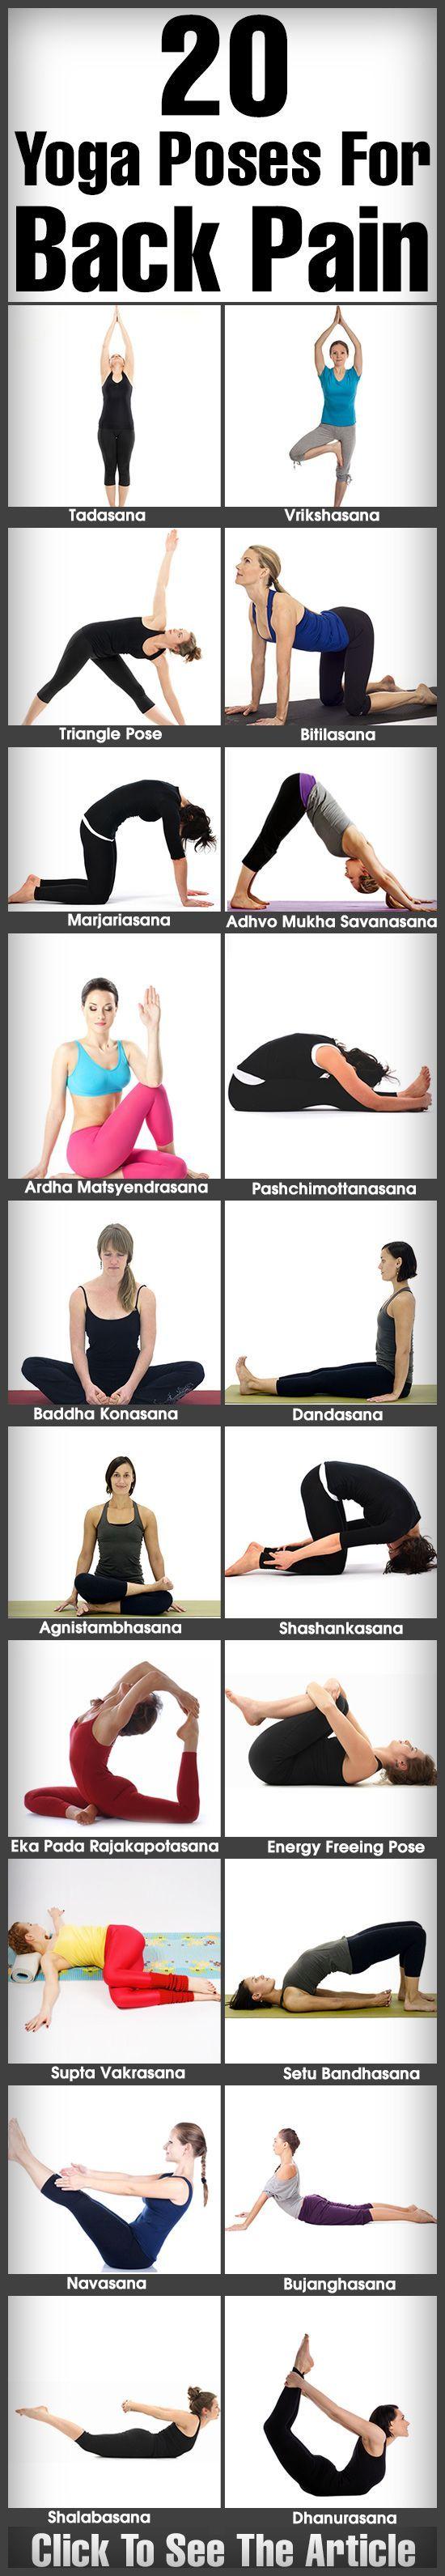 Hochzeit - Top 20 Yoga Poses For Back Pain